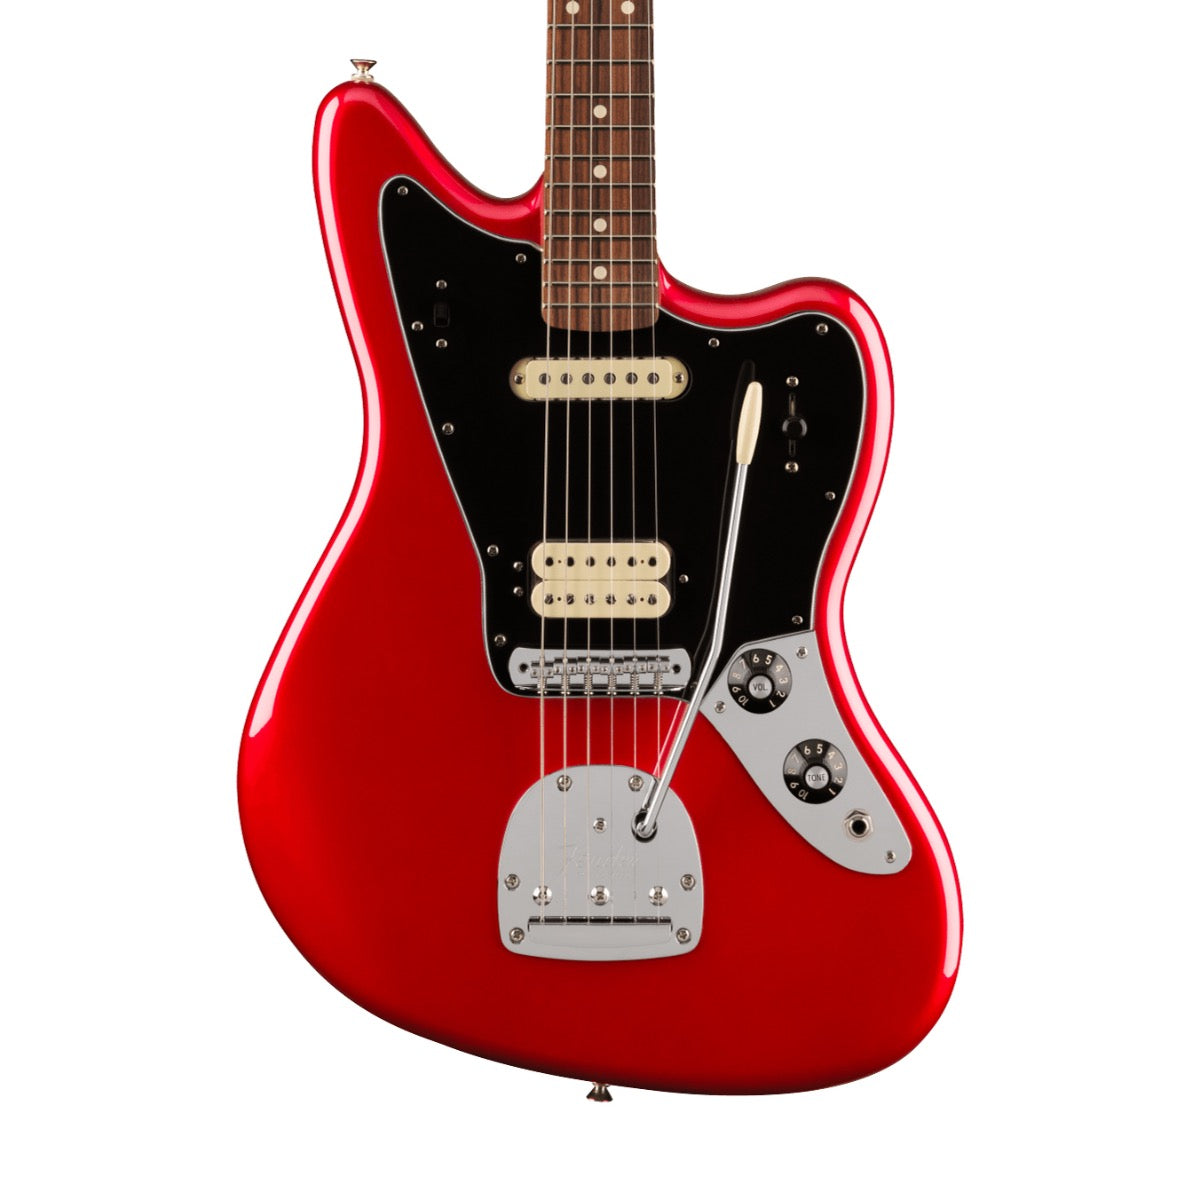 Fender Player Jaguar - Candy Apple Red, View 1